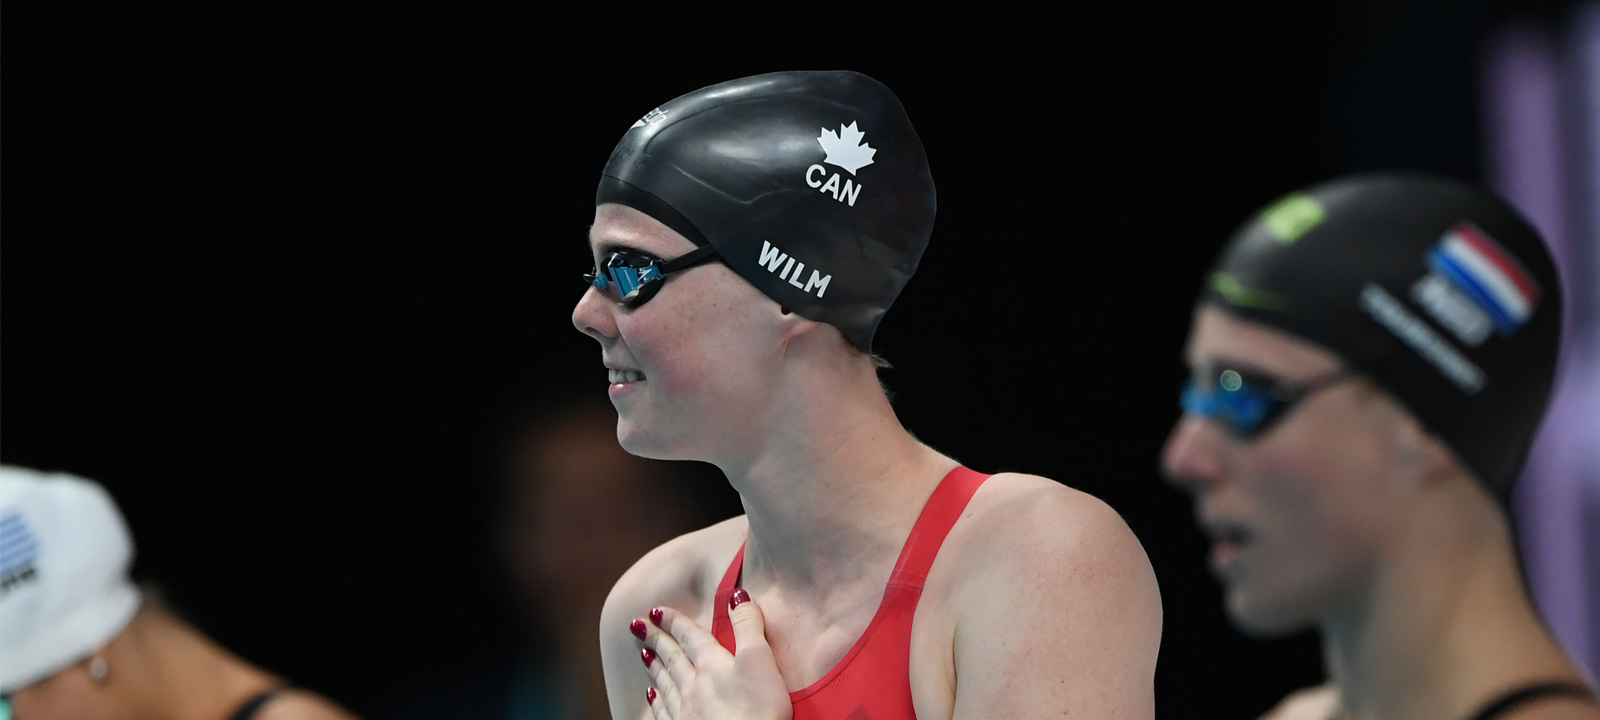 Ingrid Wilm Hits 59.4 100 Back to Win Gold on Night Two in Montreal